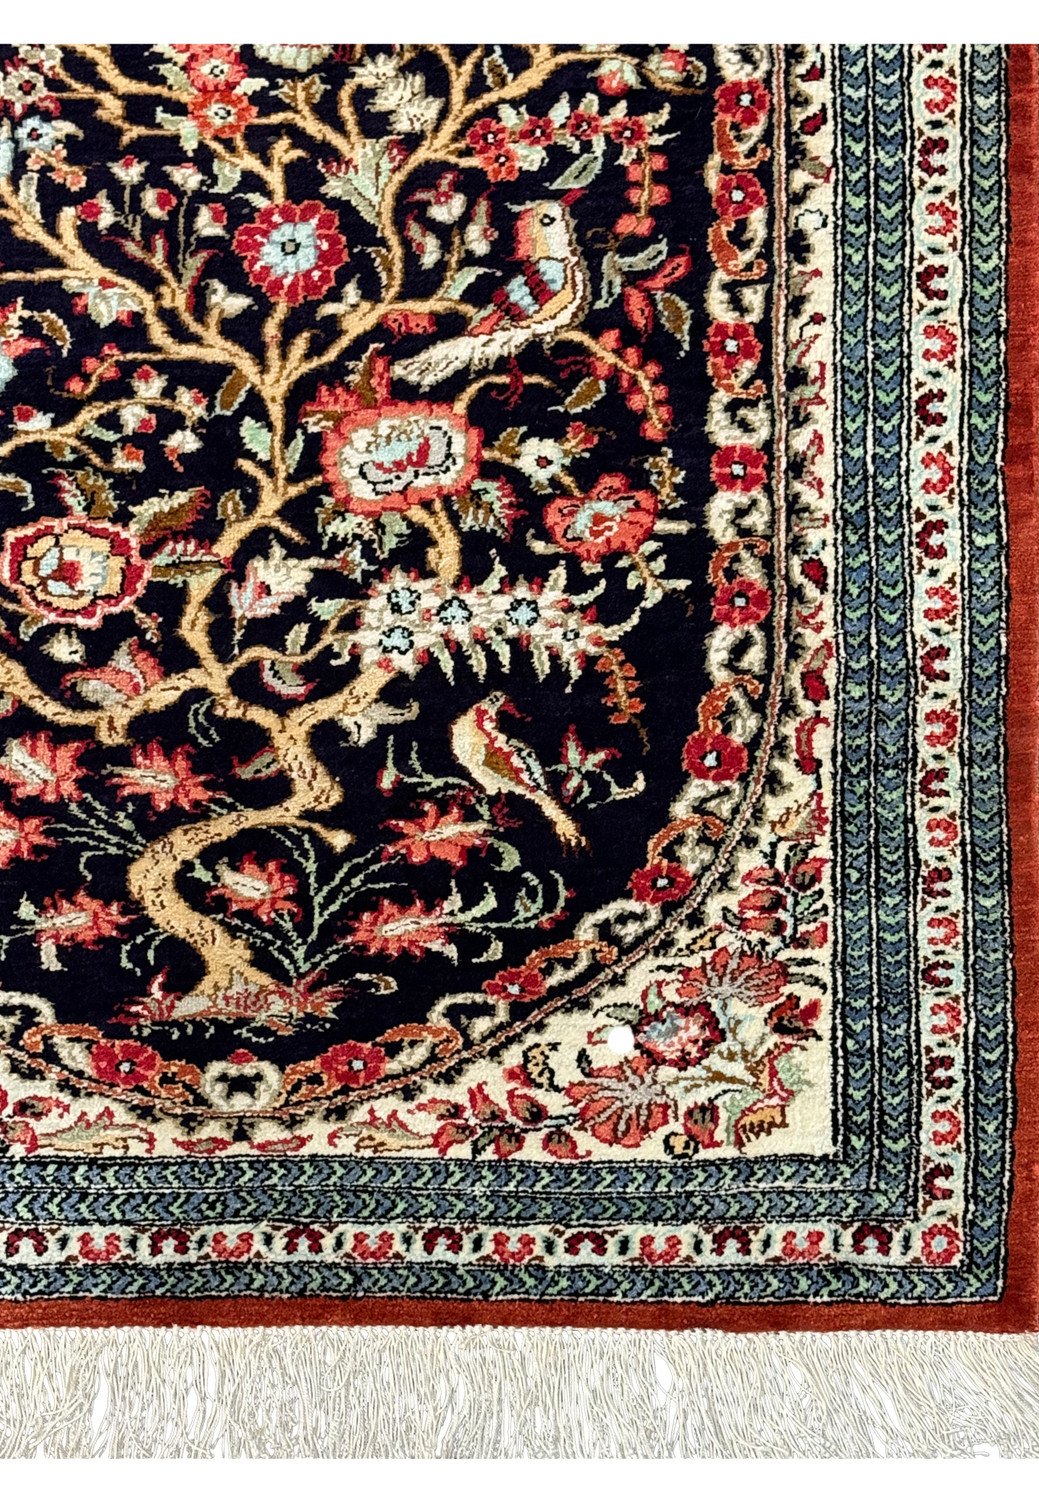 Edge of the Persian Qum silk rug, highlighting the tight weave, fringe details, and contrasting border colors